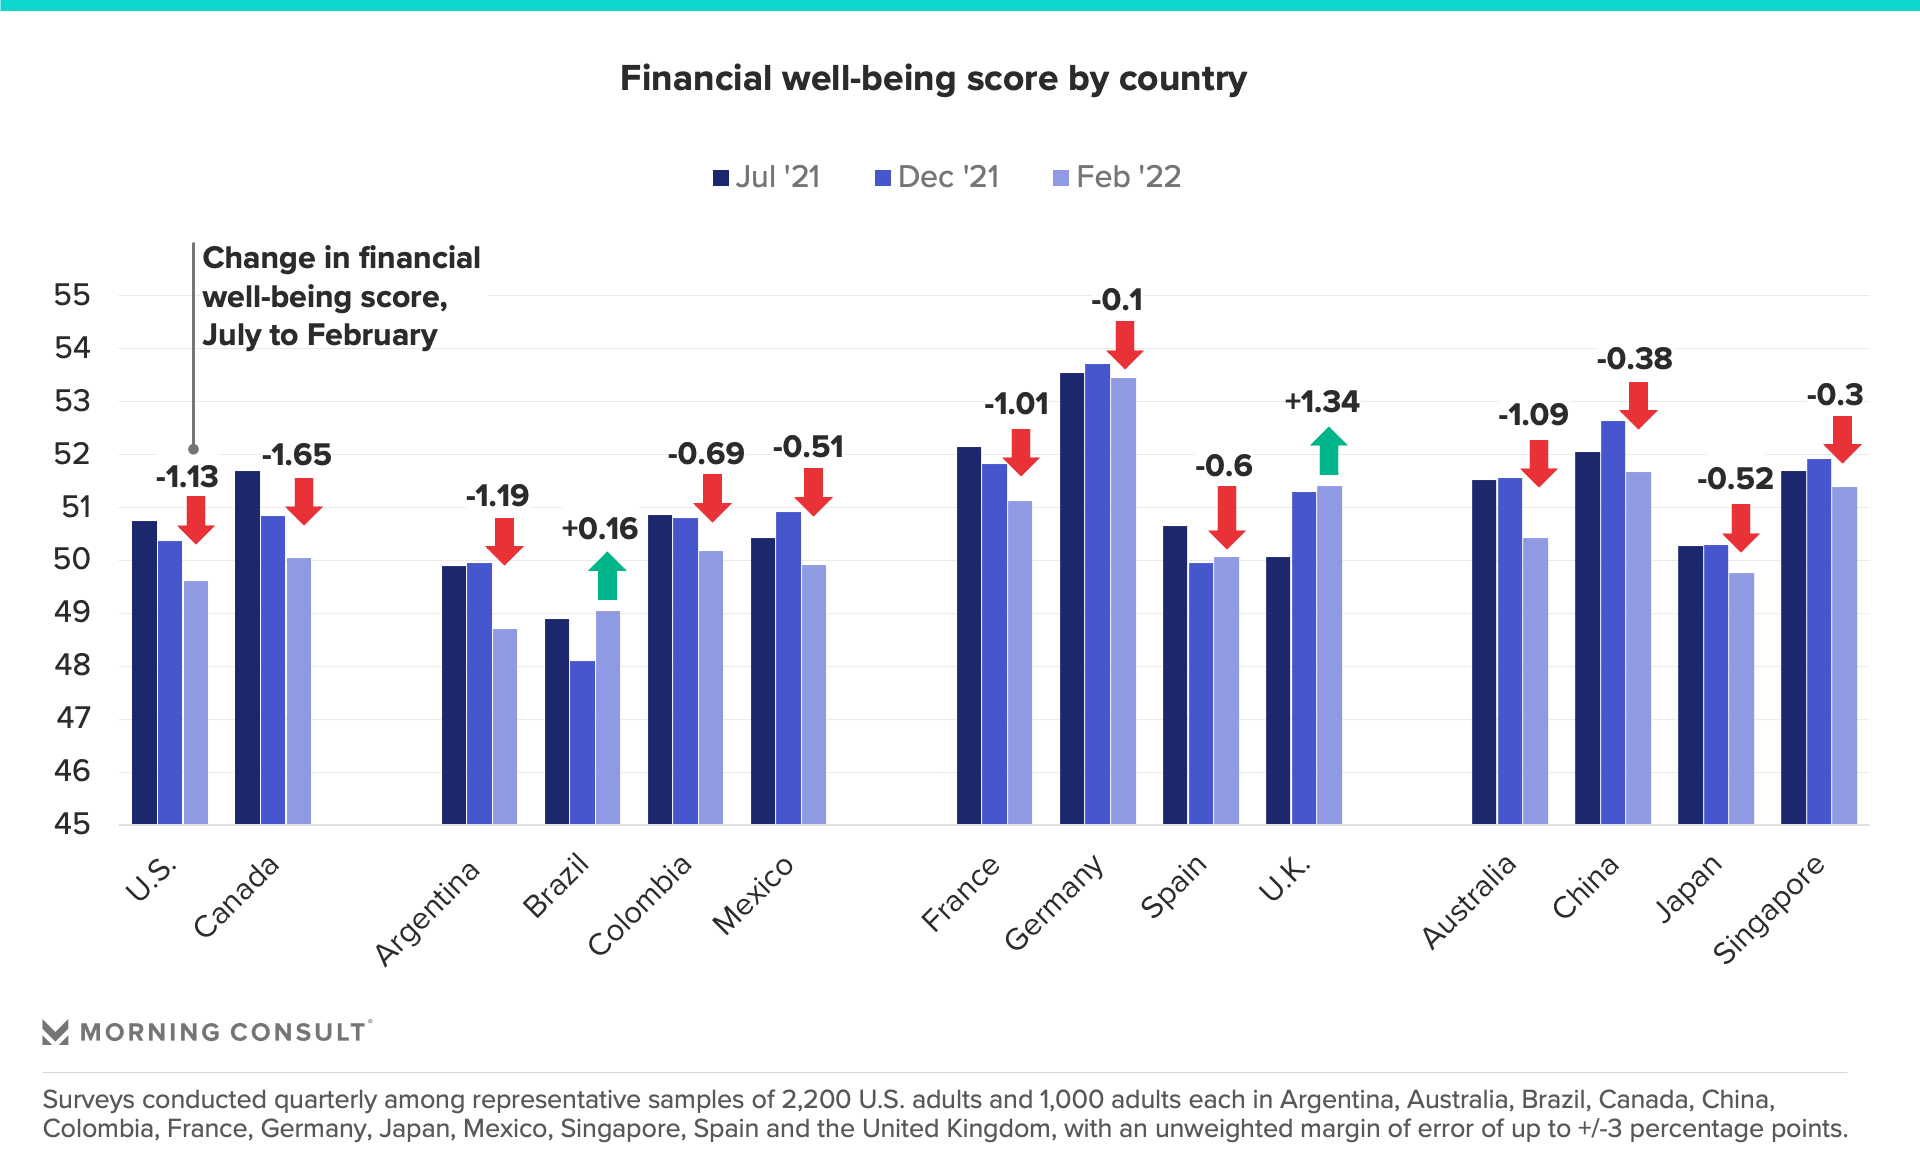 Financial well-being score by country, 2021-2022